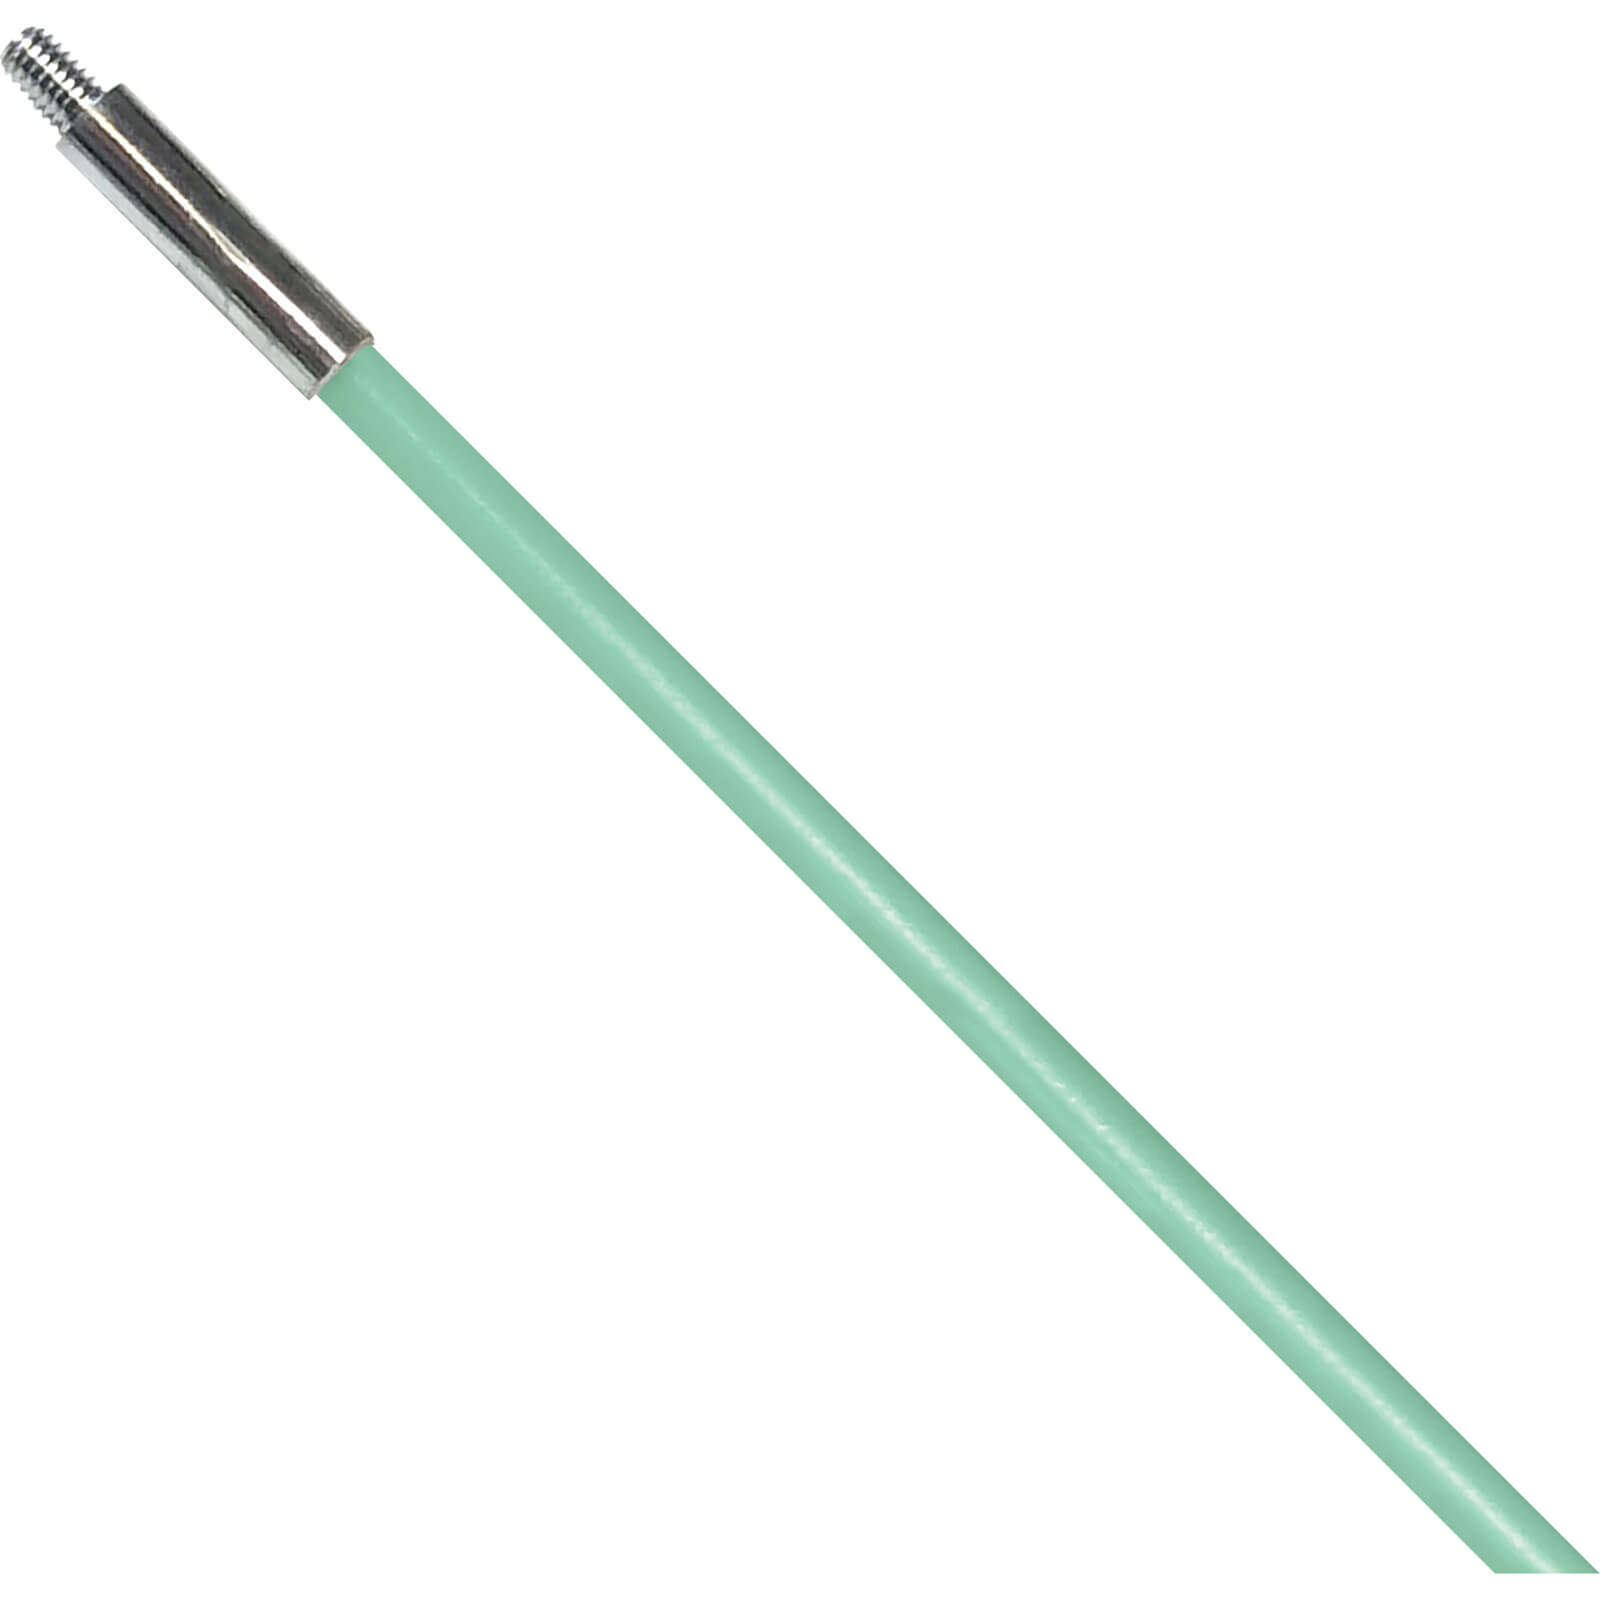 Photo of Ck Mighty Rod Pro Glo Cable Rod 6mm